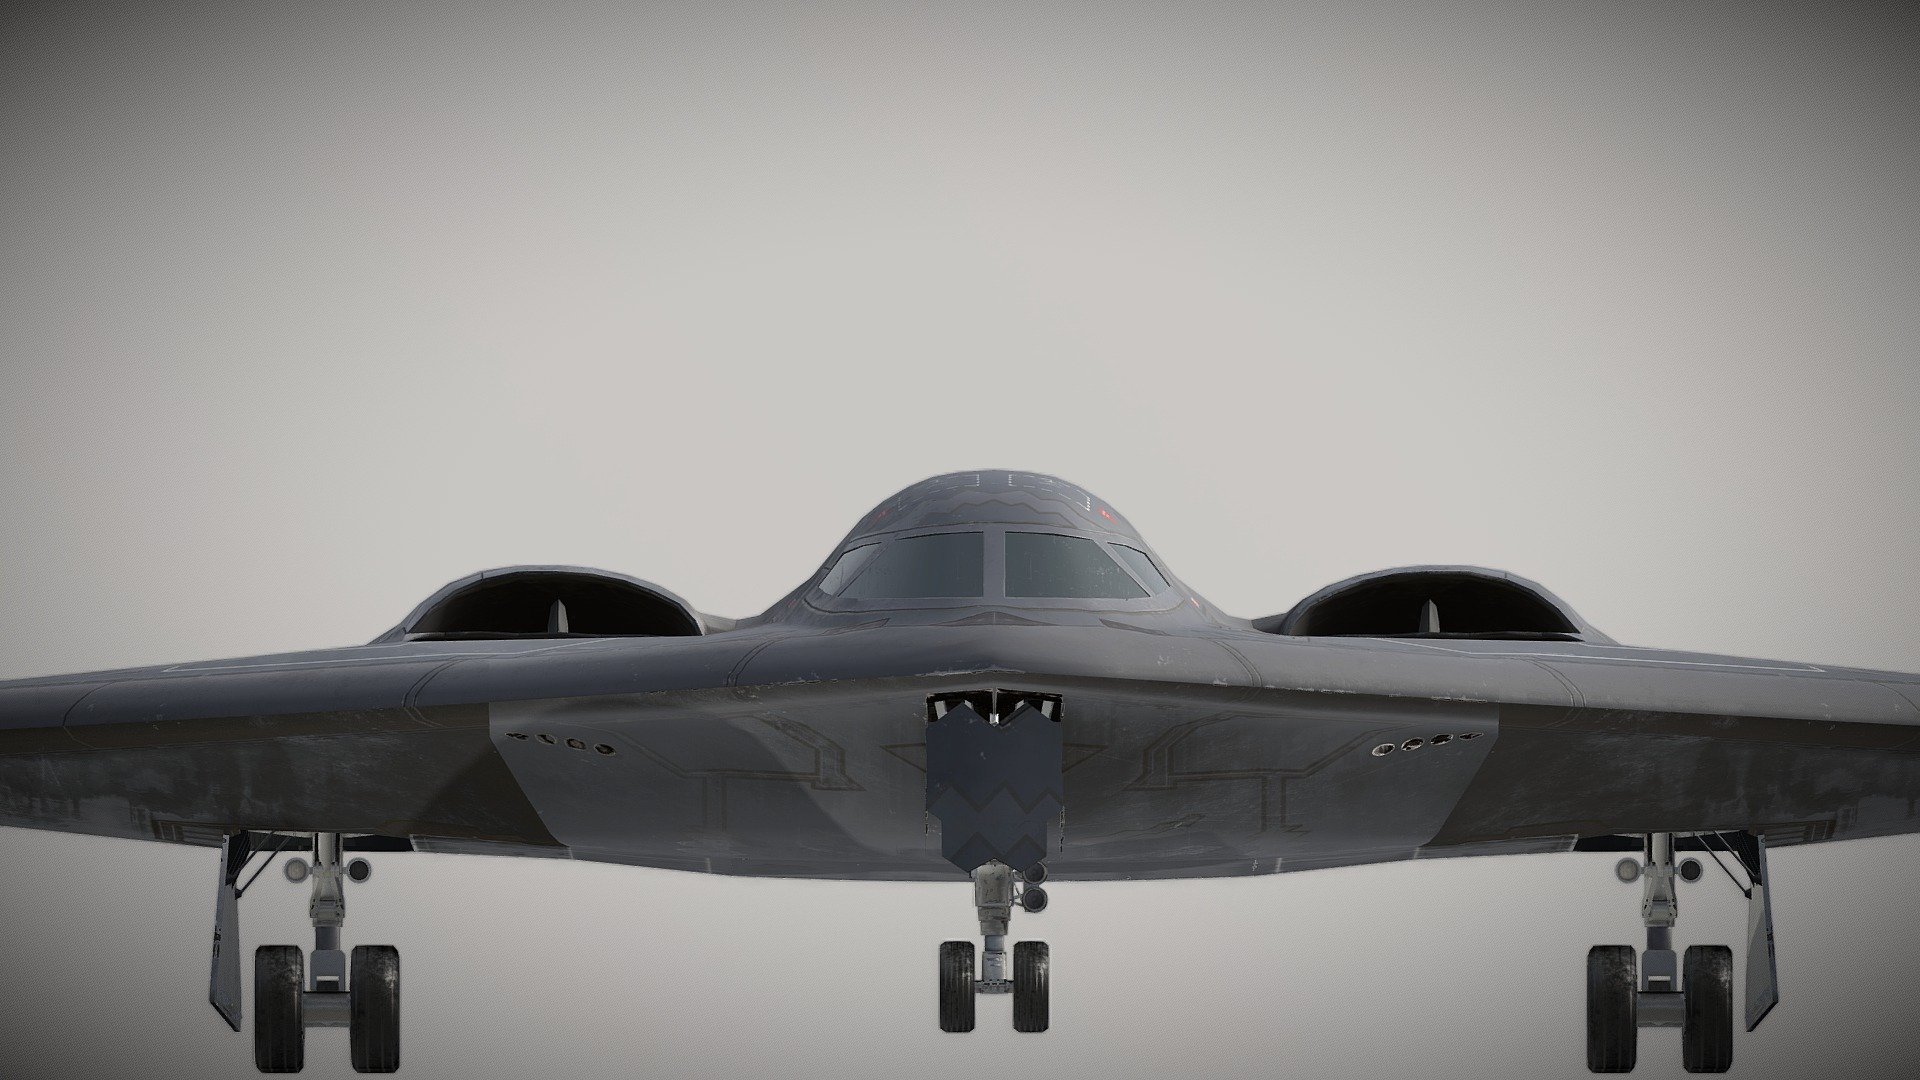 The Northrop Grumman B-2 Spirit, also known as the Stealth Bomber, is an American heavy strategic bomber, featuring low-observable stealth technology designed to penetrate dense anti-aircraft defenses. A subsonic flying wing with a crew of two, the plane was designed by Northrop (later Northrop Grumman) and produced from 1987 to 2000.[1][3] The bomber can drop conventional and thermonuclear weapons,[4] such as up to eighty 500-pound class (230 kg) Mk 82 JDAM GPS-guided bombs, or sixteen 2,400-pound (1,100 kg) B83 nuclear bombs 3d model